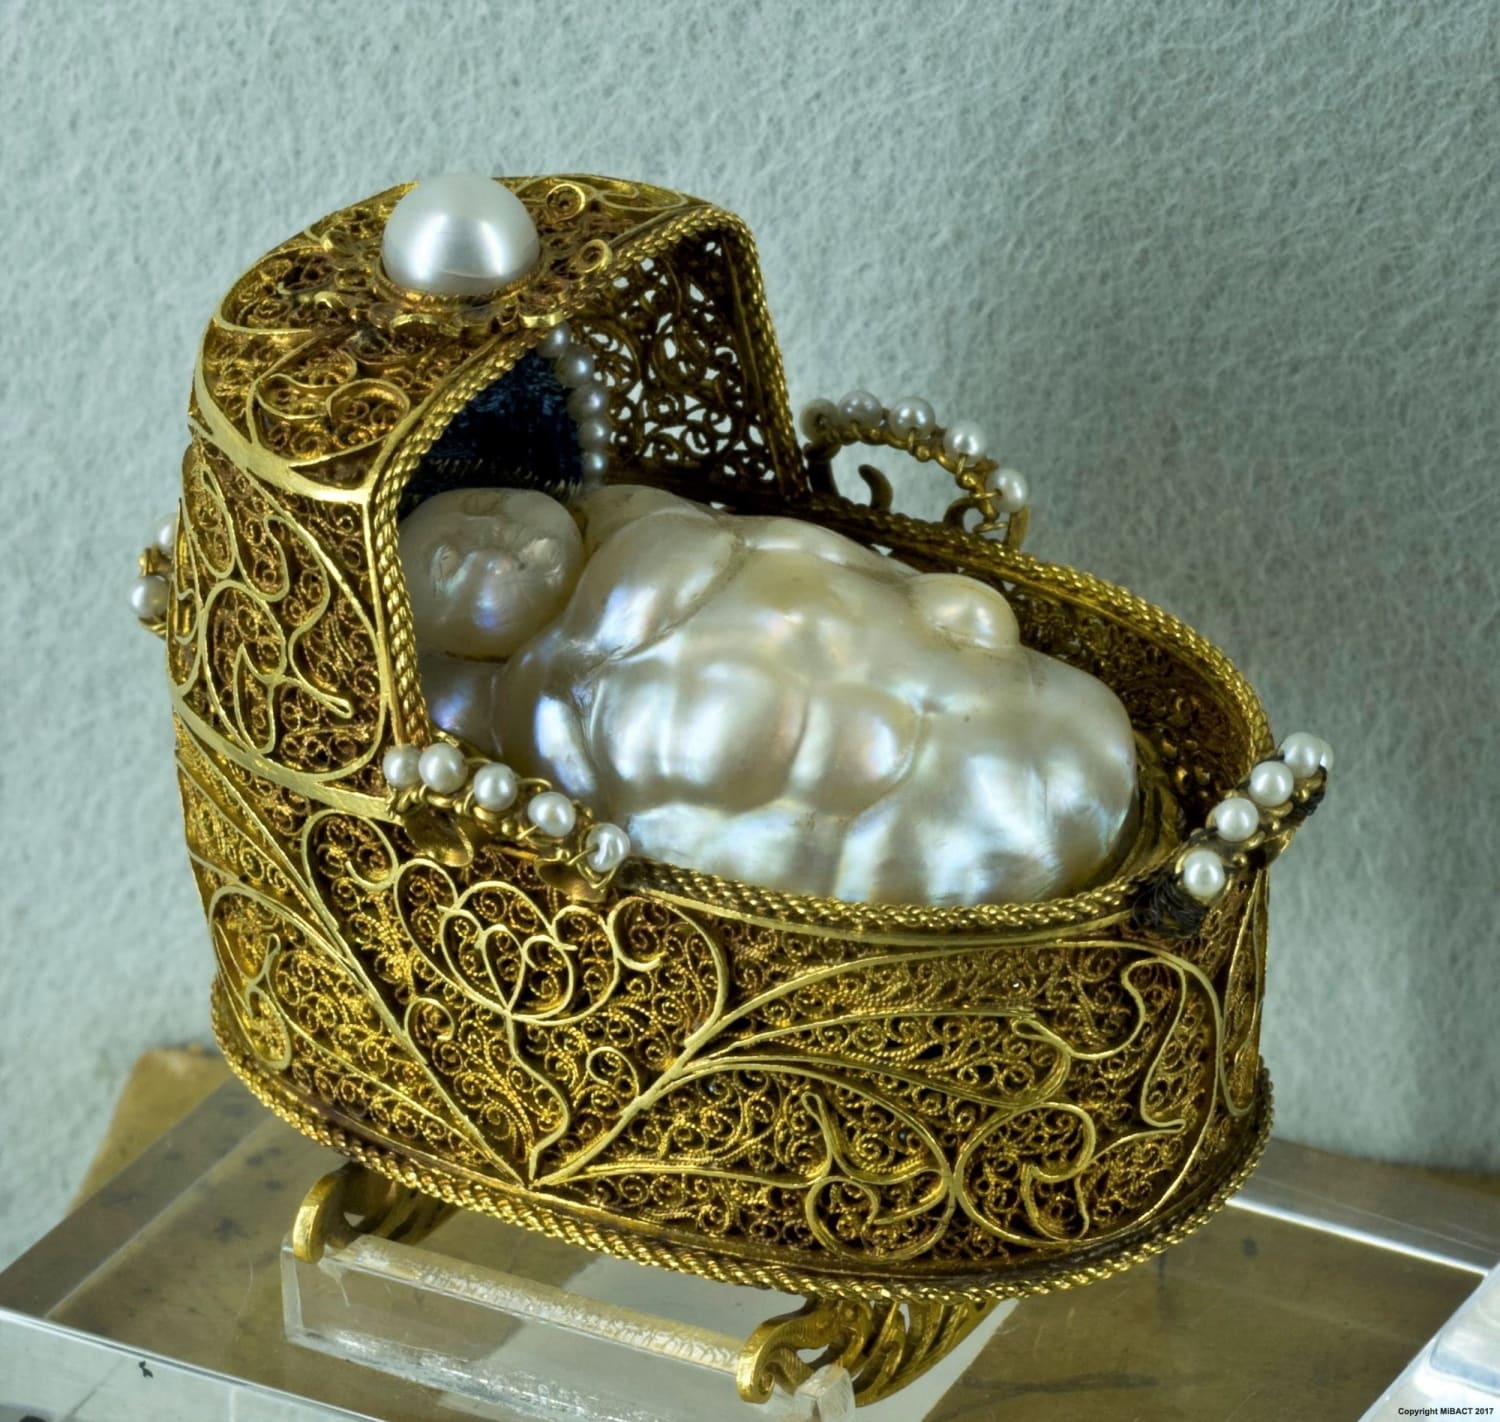 'Cradle with Child' - Gold filigree, enamel, two baroque pearls, twenty-eight diamonds, twenty-one pearls and blue silk quilted with pearls-mm - Dutch goldsmith - 1695 ca.